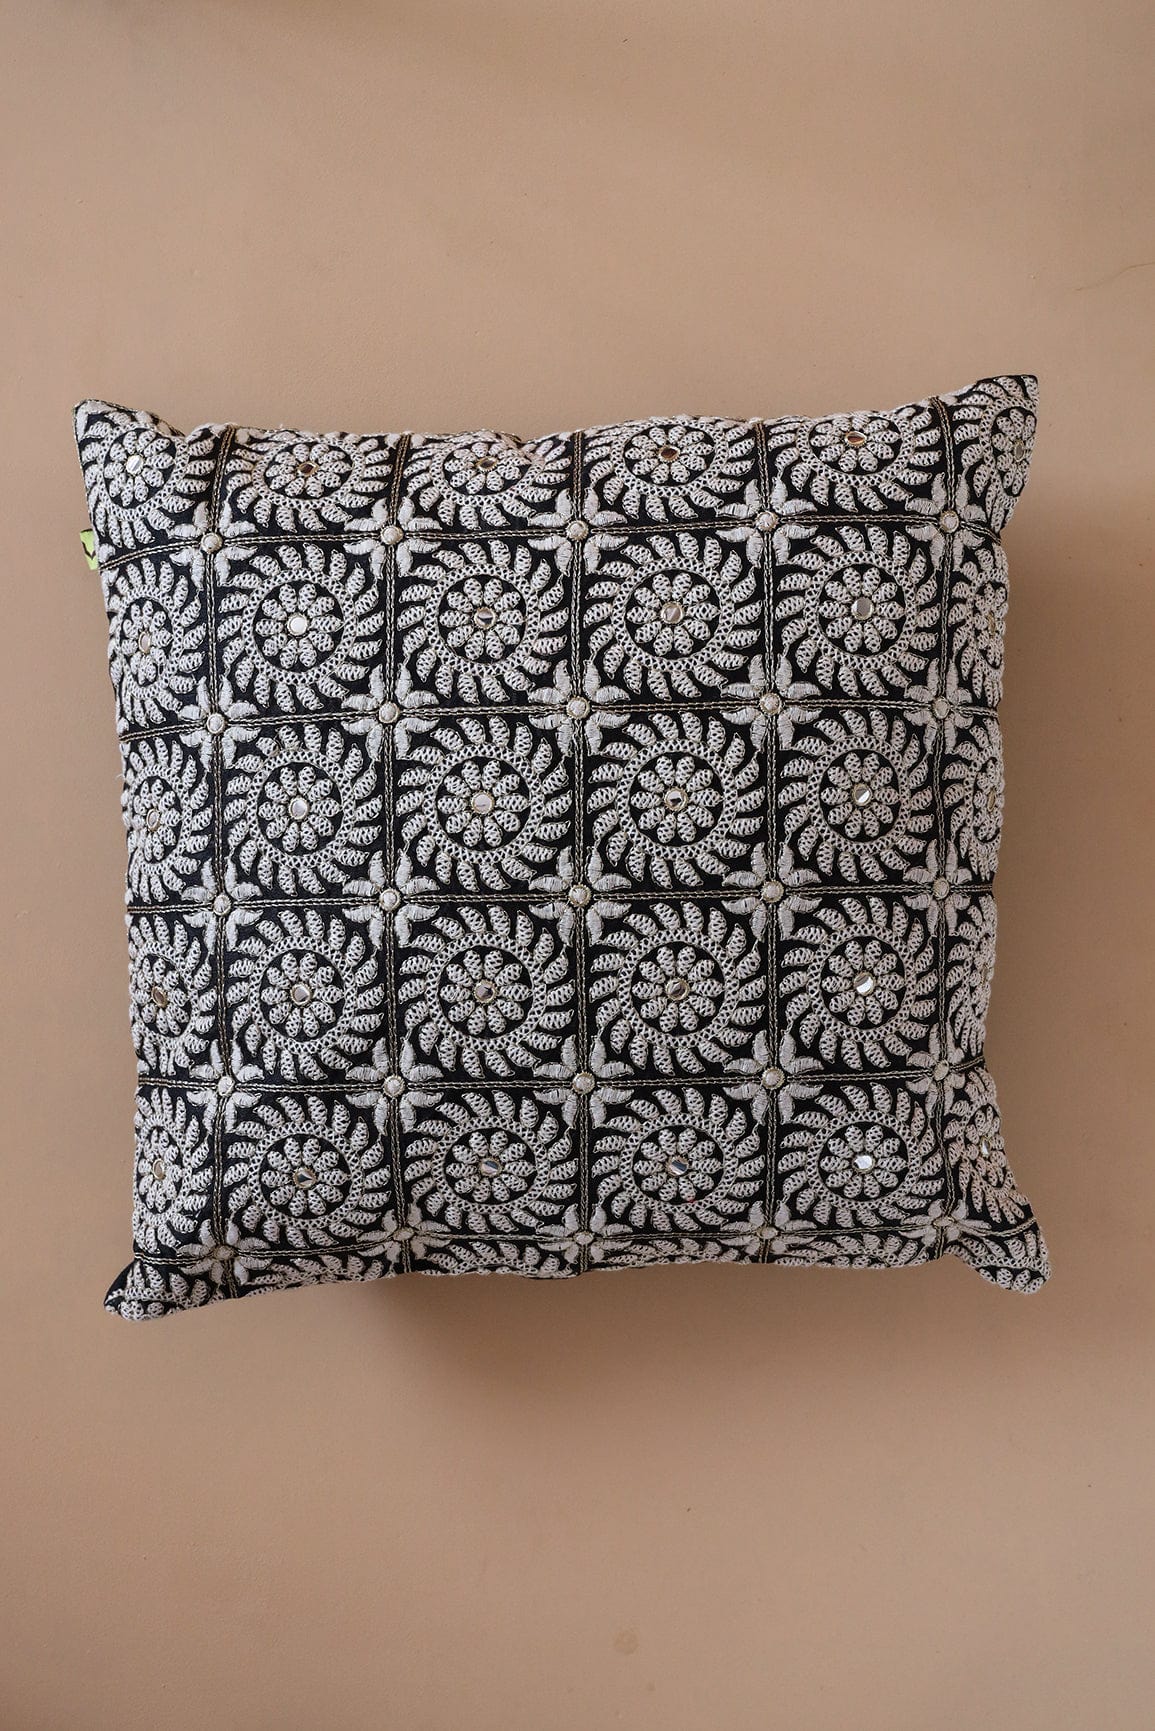 doeraa Heavy White Embroidery on Black cotton Cushion Cover (16*16 inches)